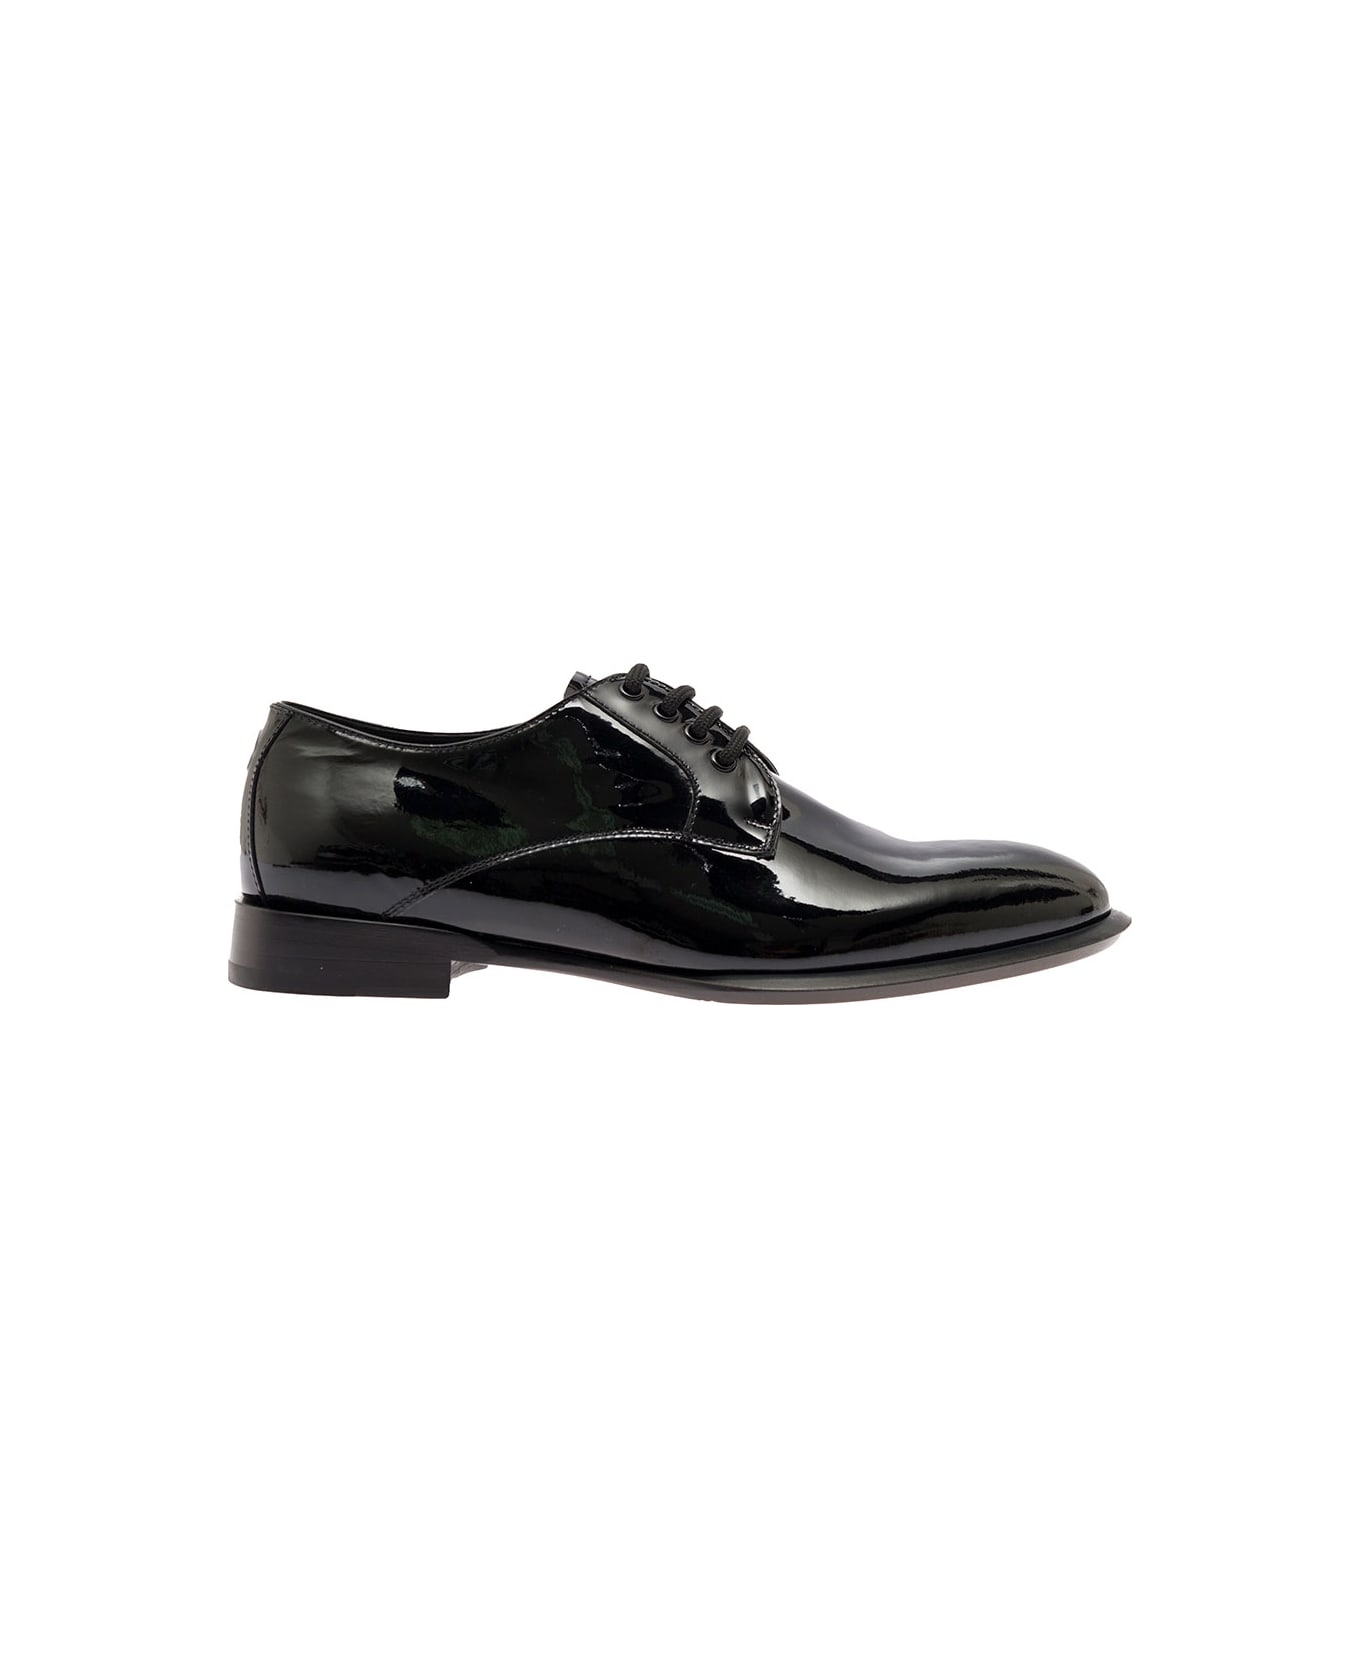 Alexander McQueen Black Oxford Shoes In Patent Leather Man - Black